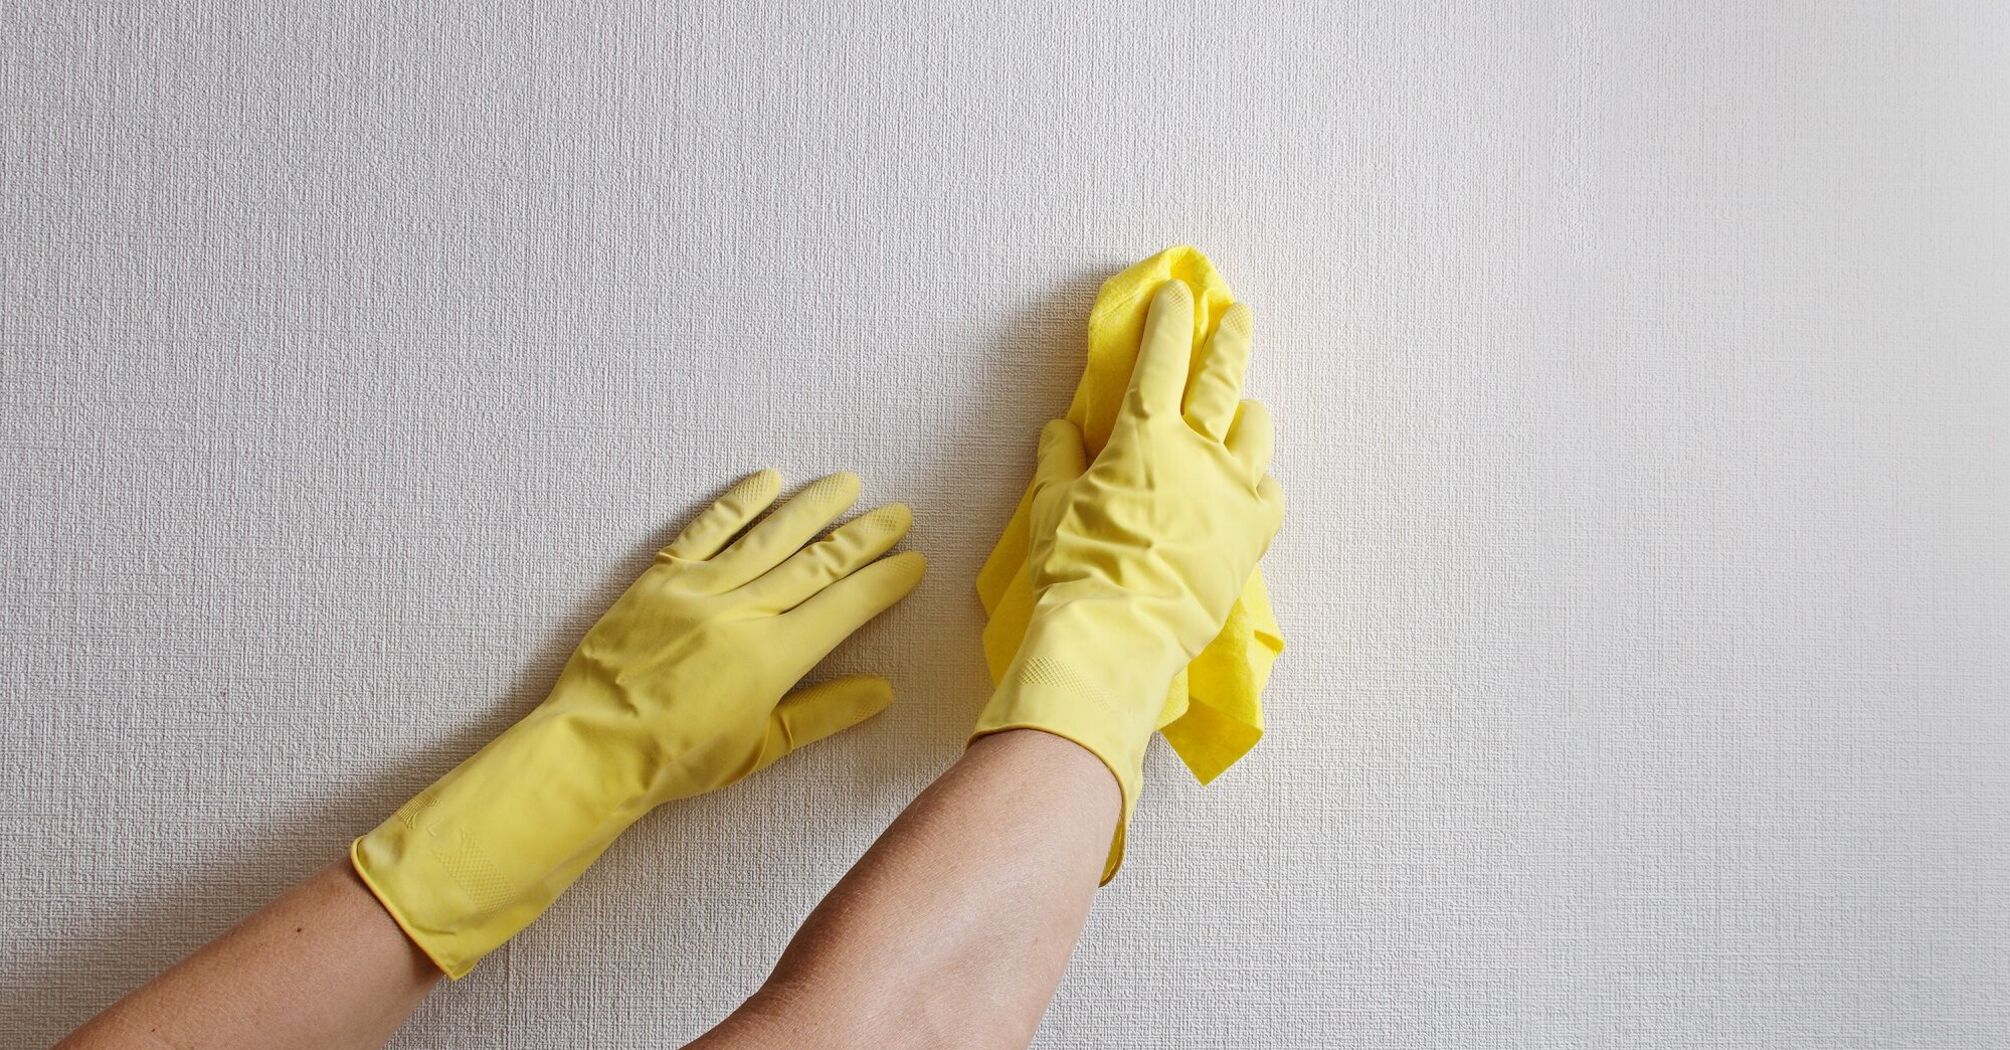 How to quickly remove greasy stains from wallpaperHow to quickly remove greasy stains from wallpaper